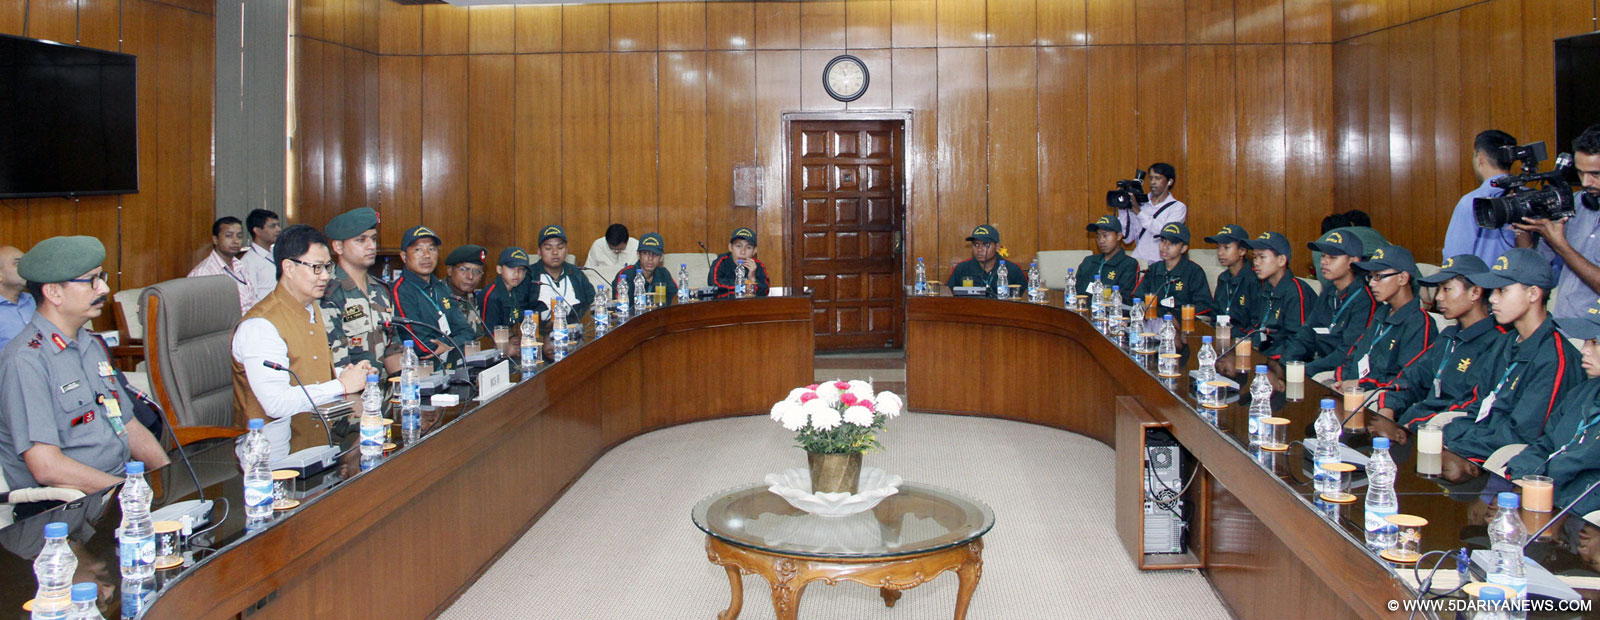 The Minister of State for Home Affairs, Shri Kiren Rijiju interacting with a group of school children from Manipur, who are on a National Integration Tour, organised by the Assam Rifles, in New Delhi on October 13, 2015.